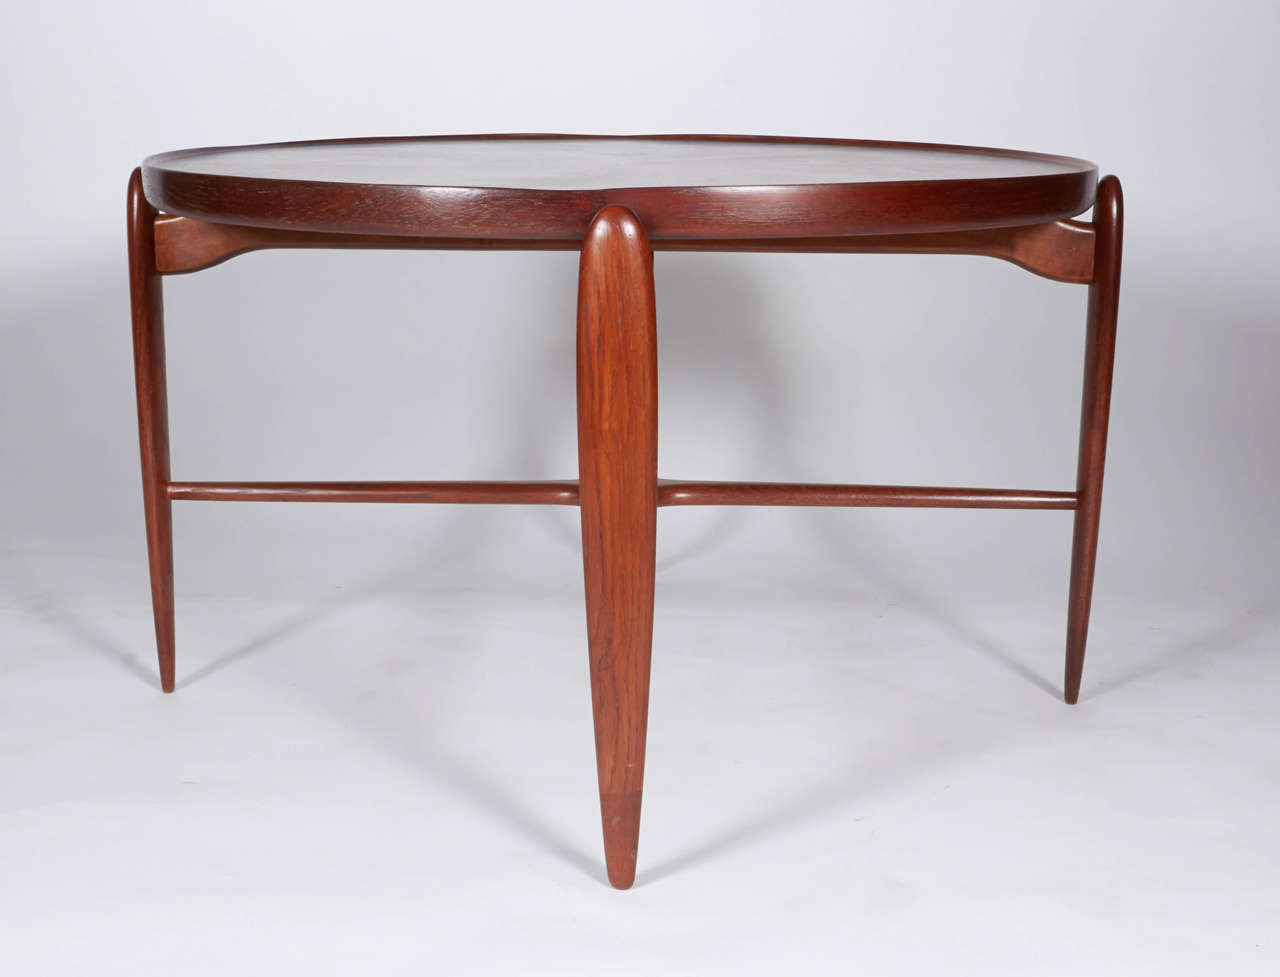 The Danish coffee table boasts simple elegance in its floating (top does not separate) top and tapered sleek legs.